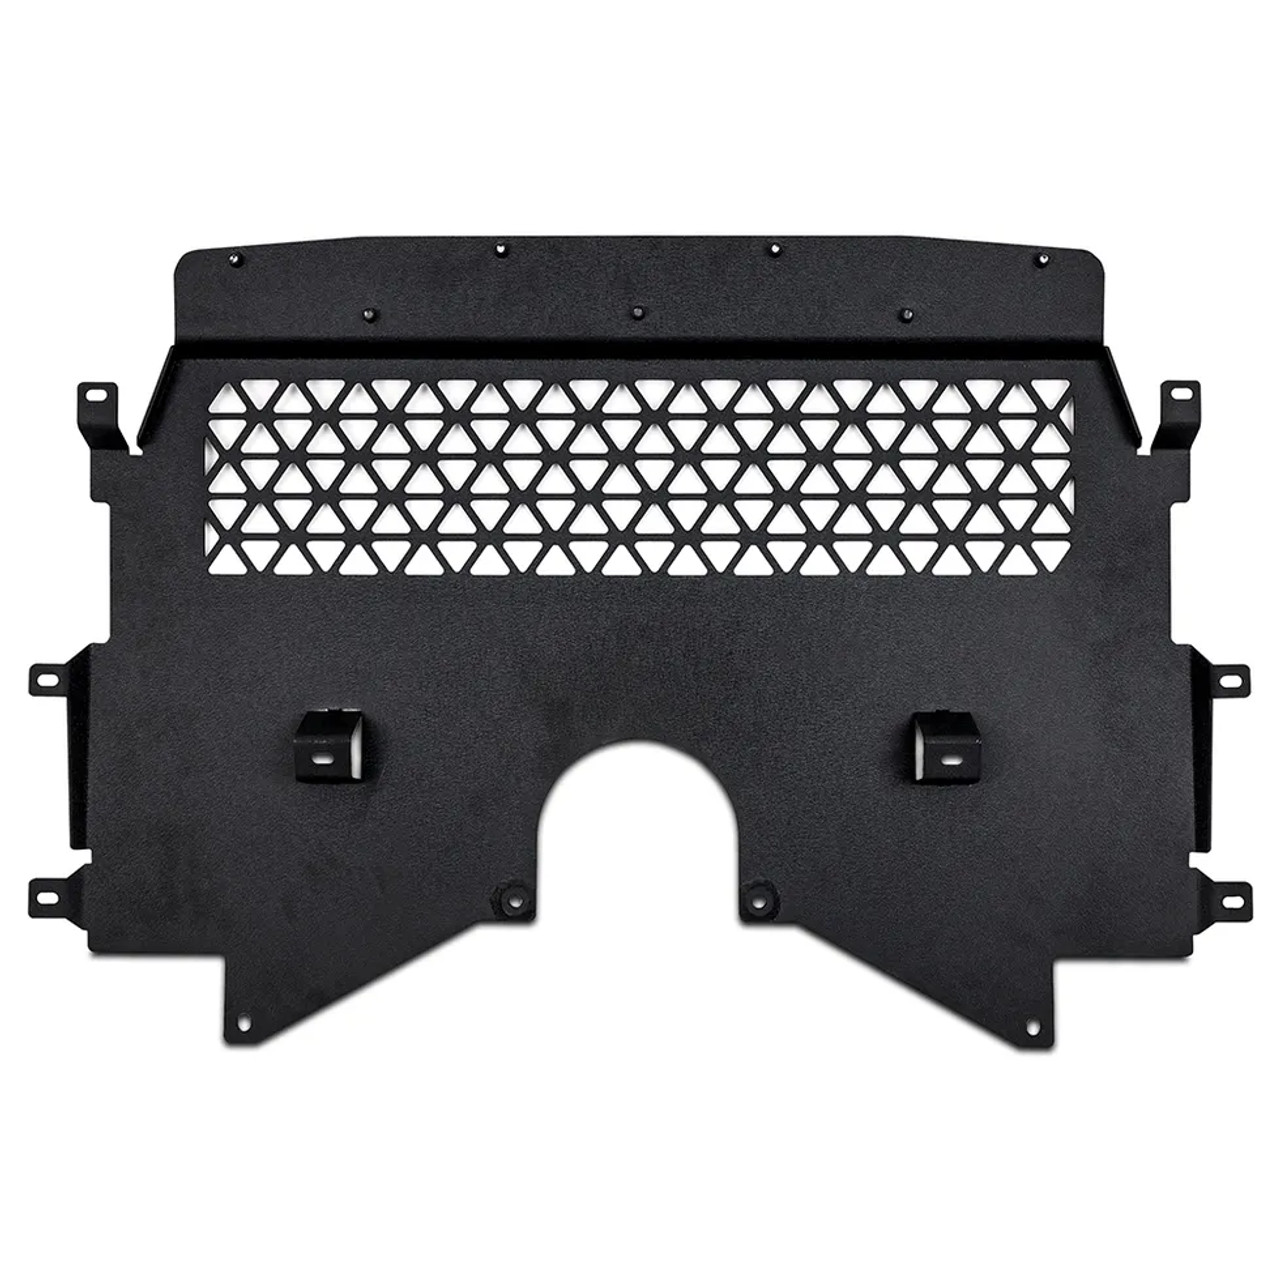 Mishimoto Skid Plate for G80 M3, G82/G83 M4 & G87 M2